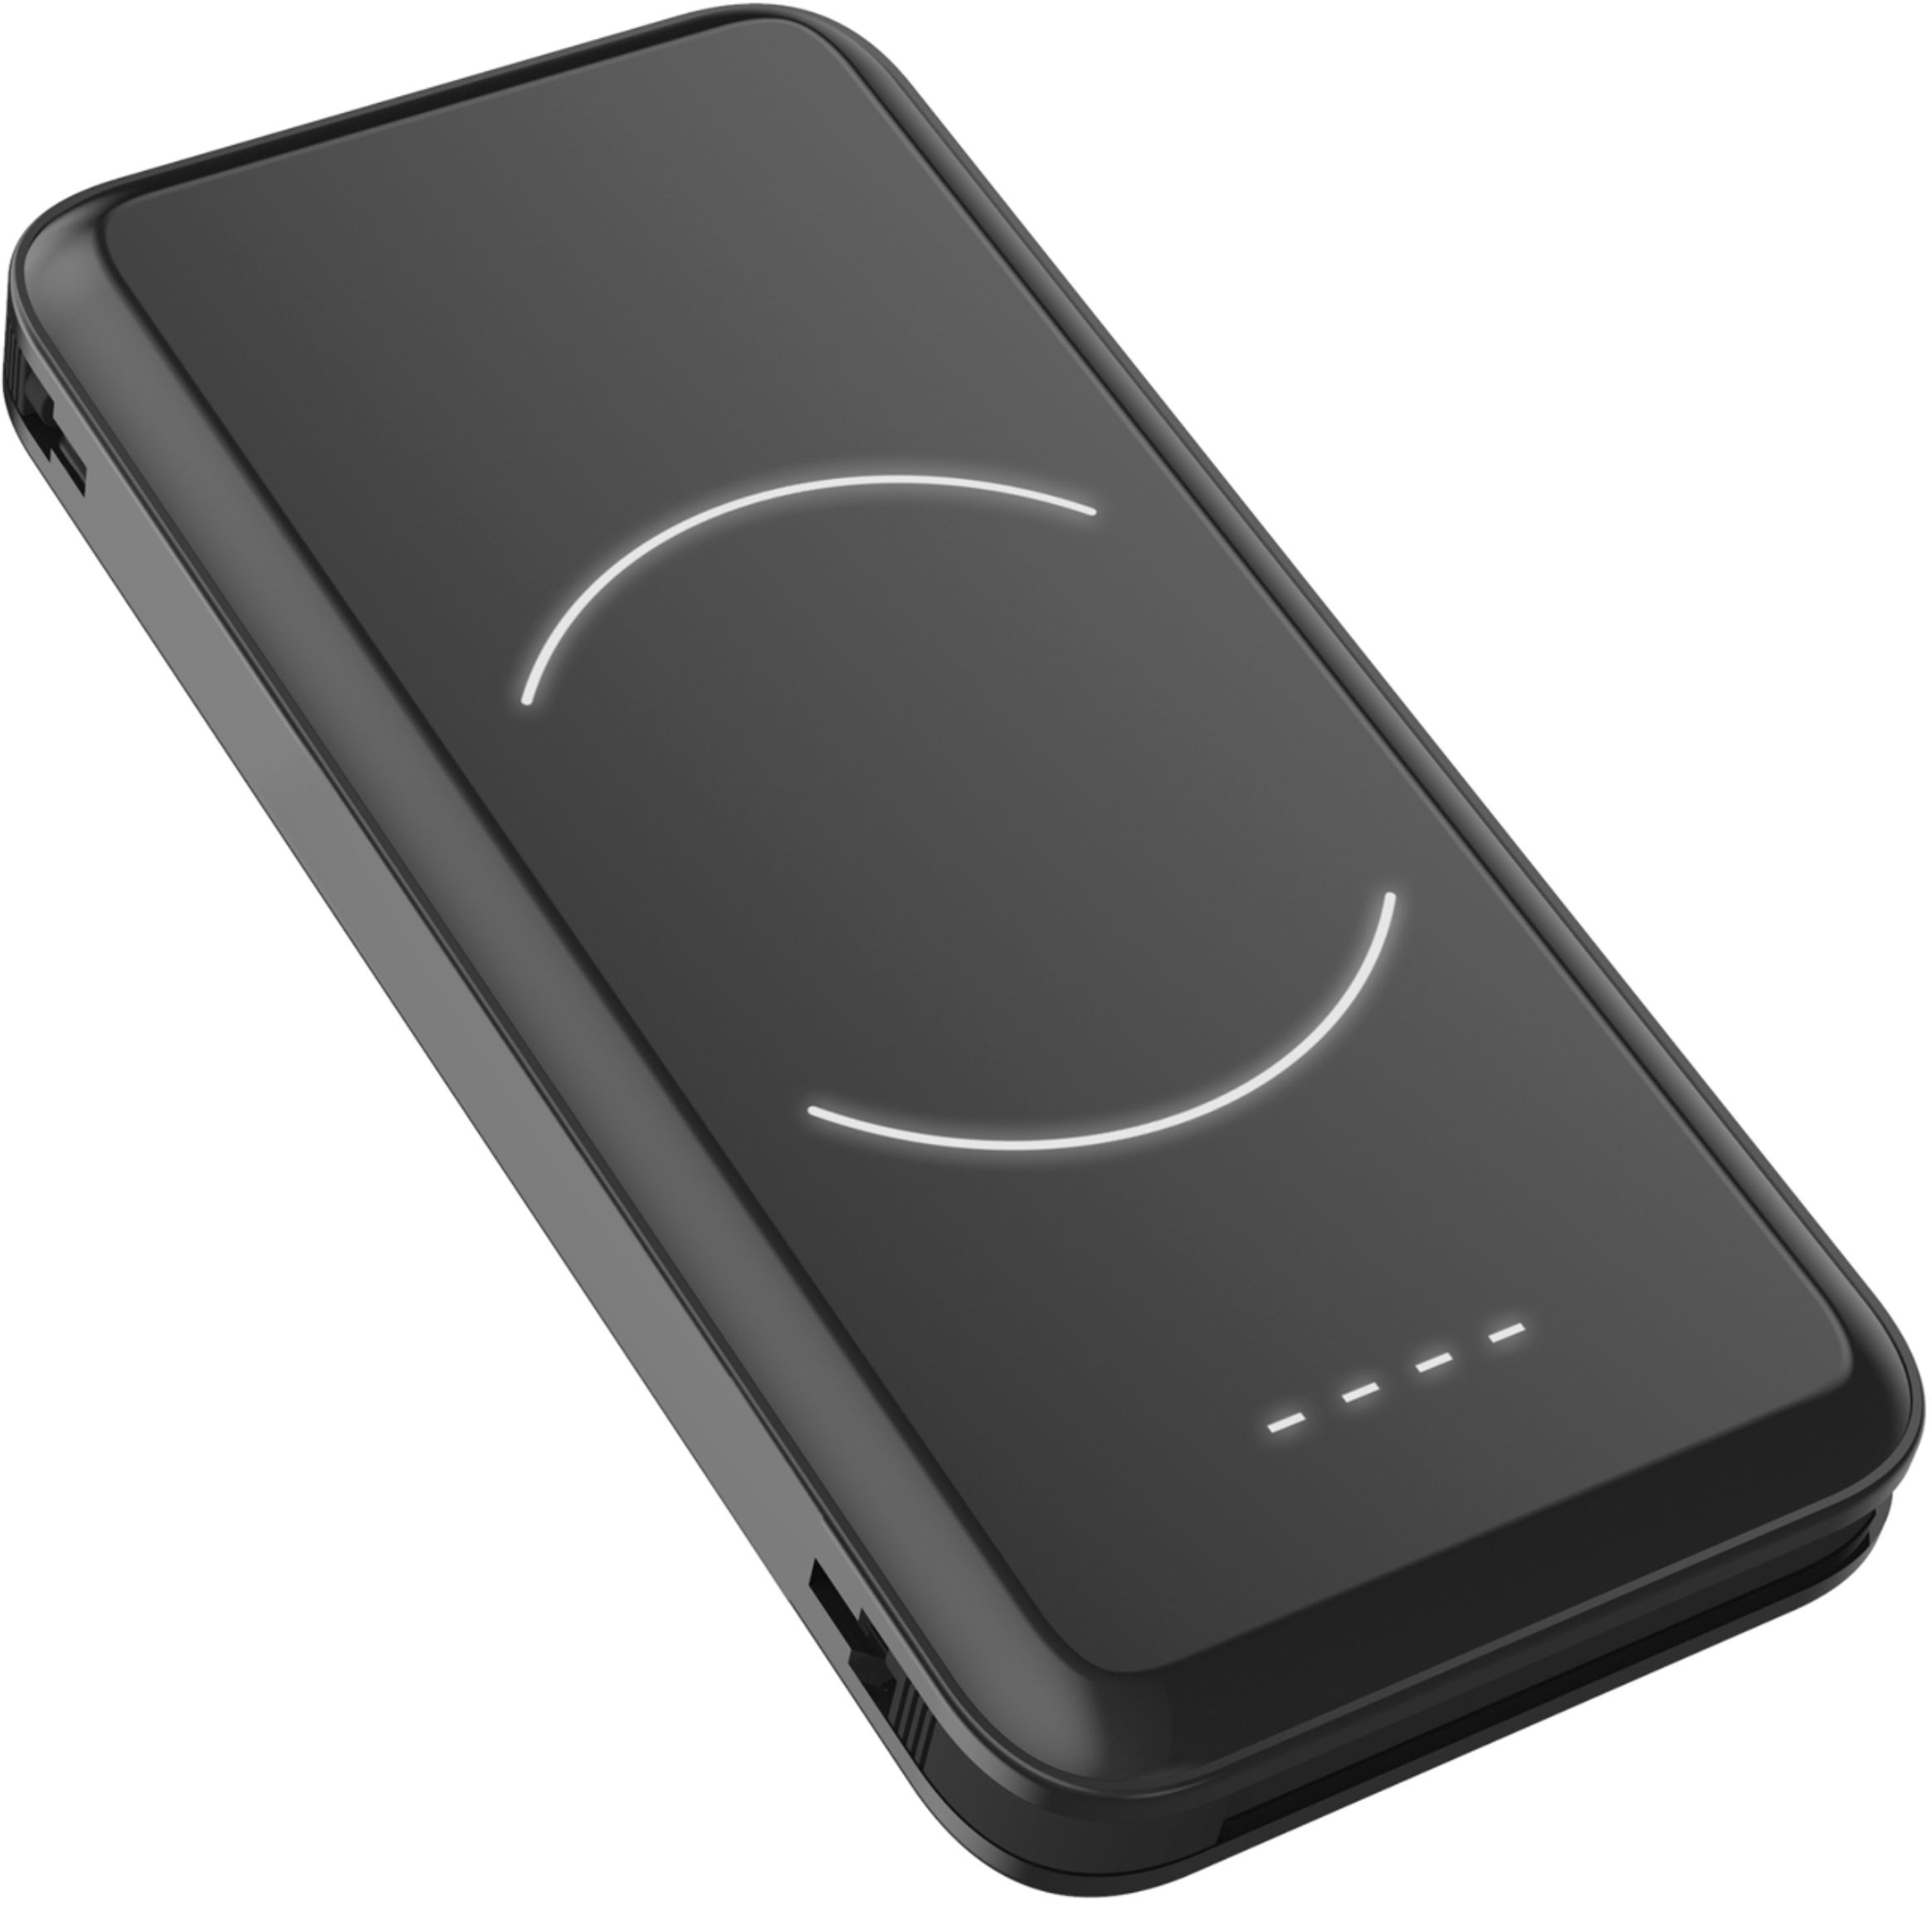 myCharge - PowerPad+Cables 10,000mAh Internal Wireless Battery Portable Charger - Black